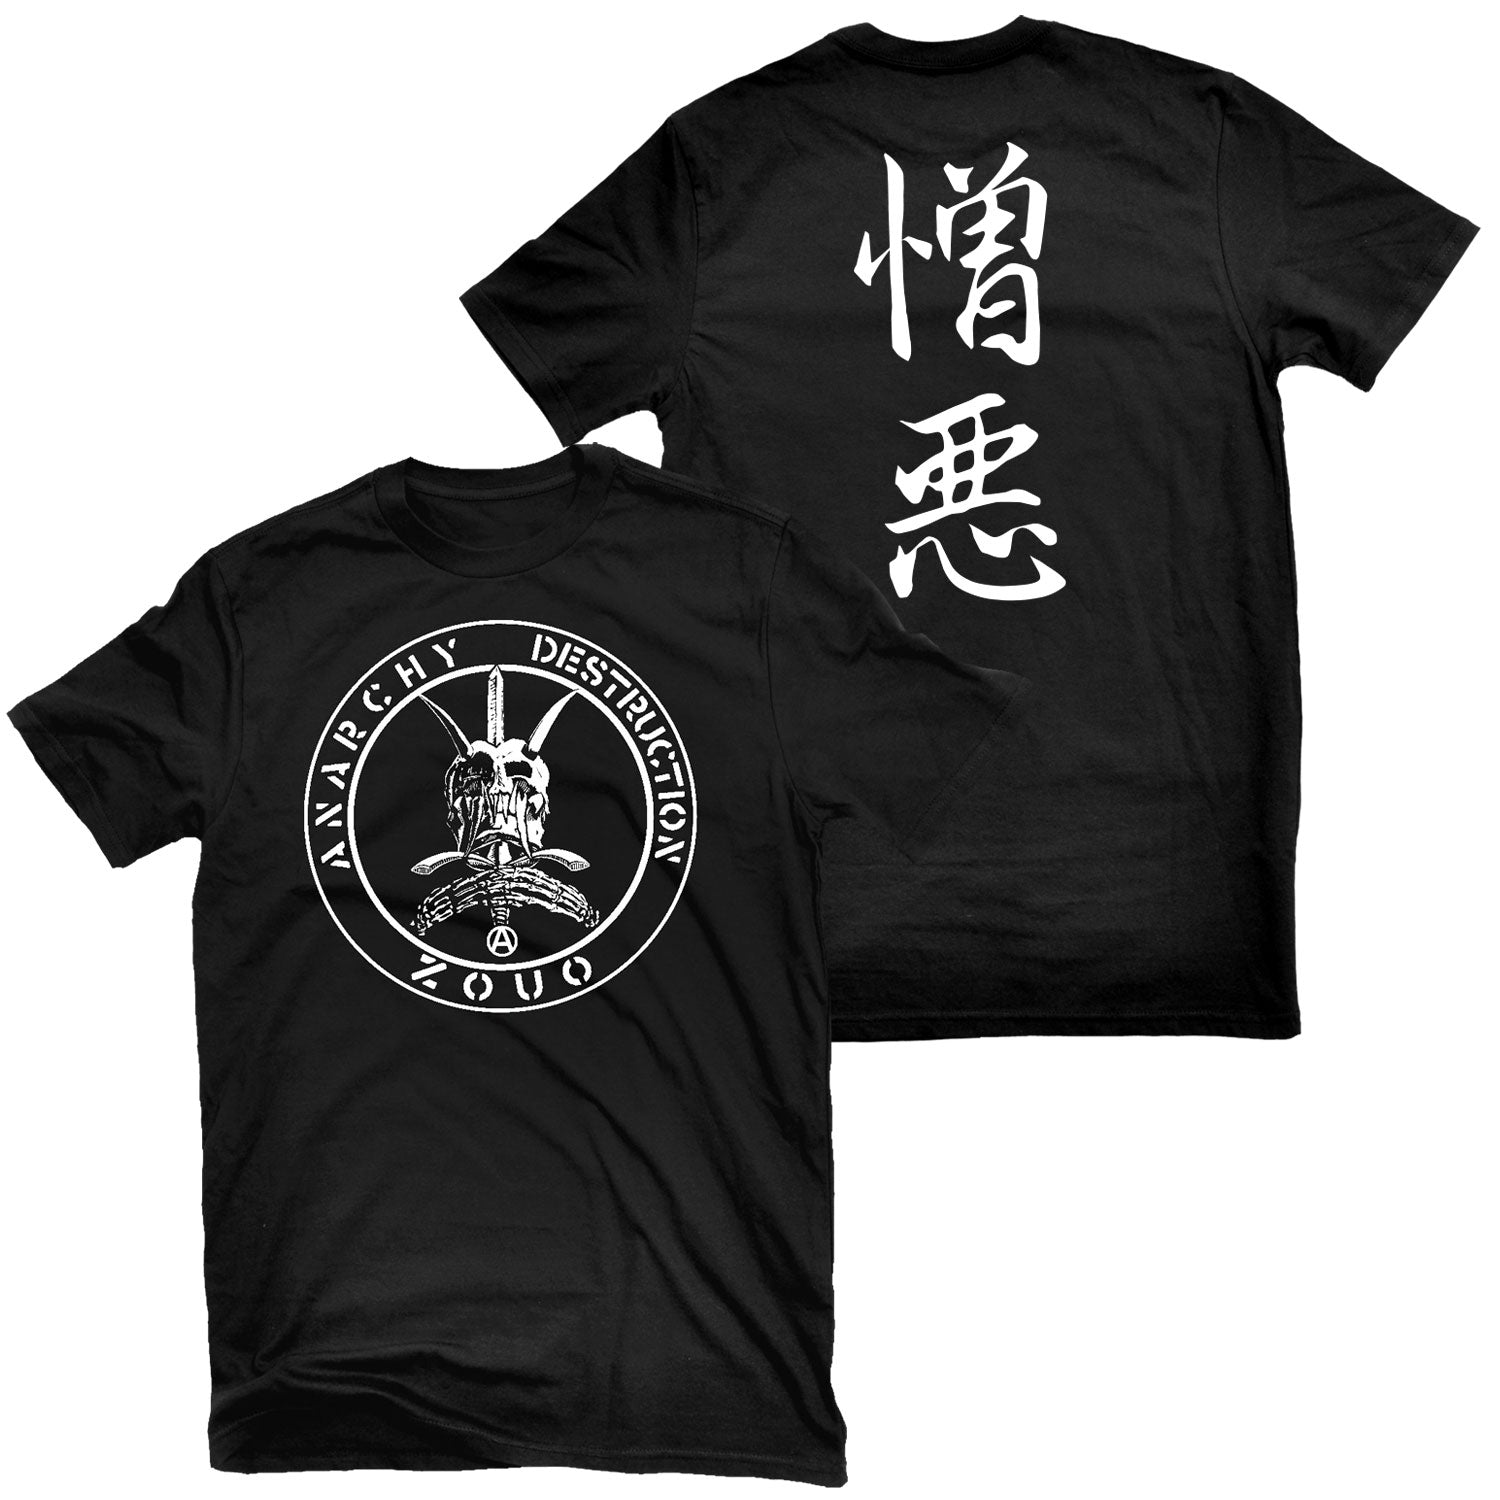 Zouo "AGONY憎悪REMAINS" T-Shirt